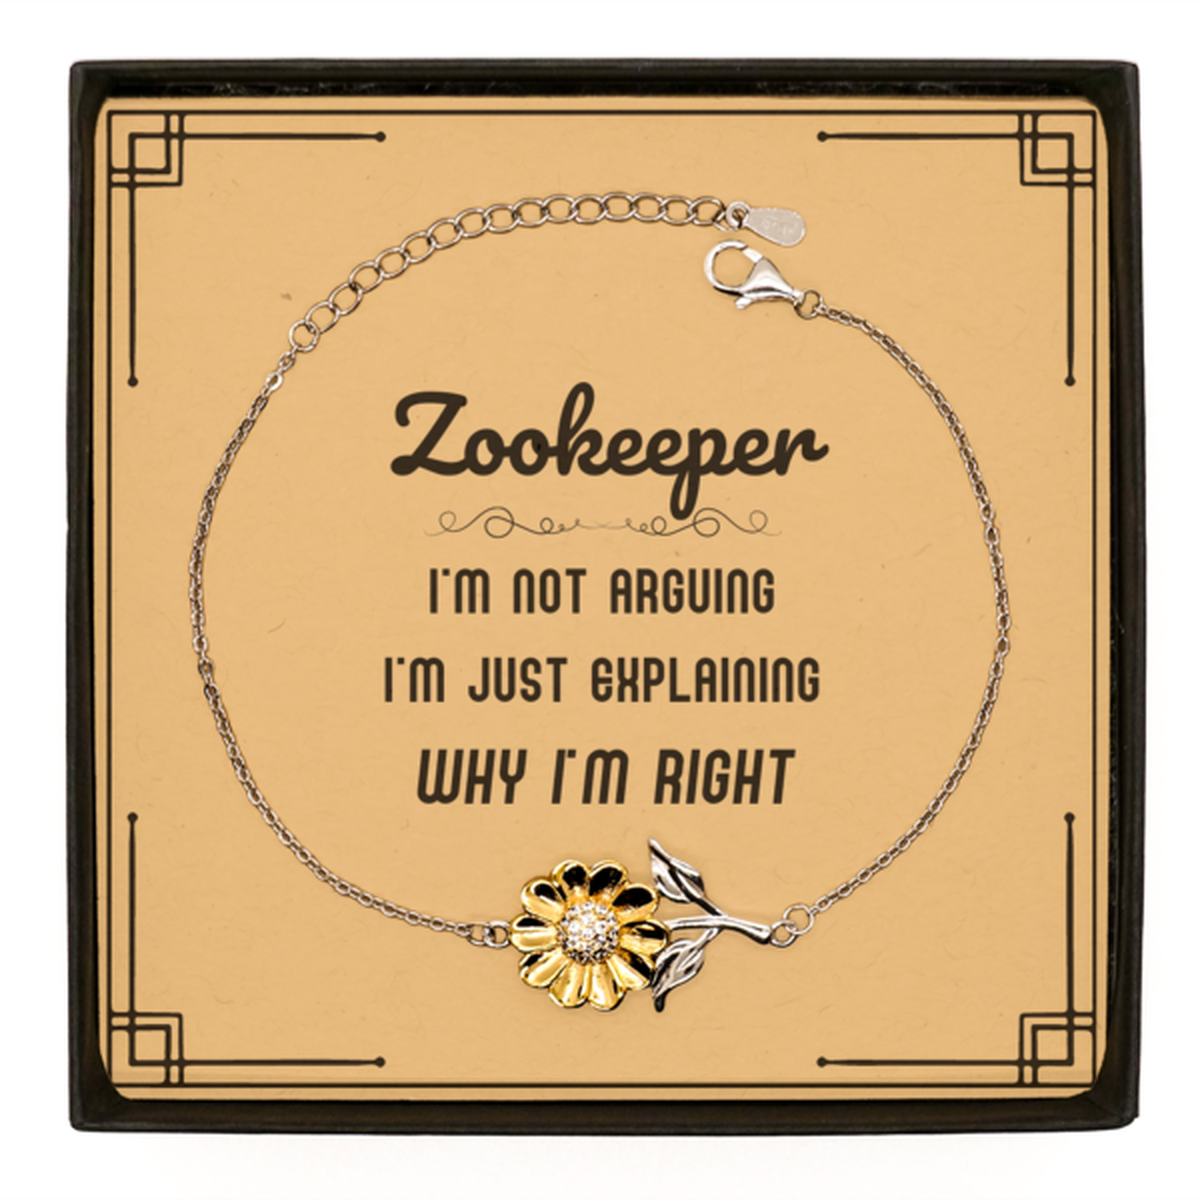 Zookeeper I'm not Arguing. I'm Just Explaining Why I'm RIGHT Sunflower Bracelet, Funny Saying Quote Zookeeper Gifts For Zookeeper Message Card Graduation Birthday Christmas Gifts for Men Women Coworker